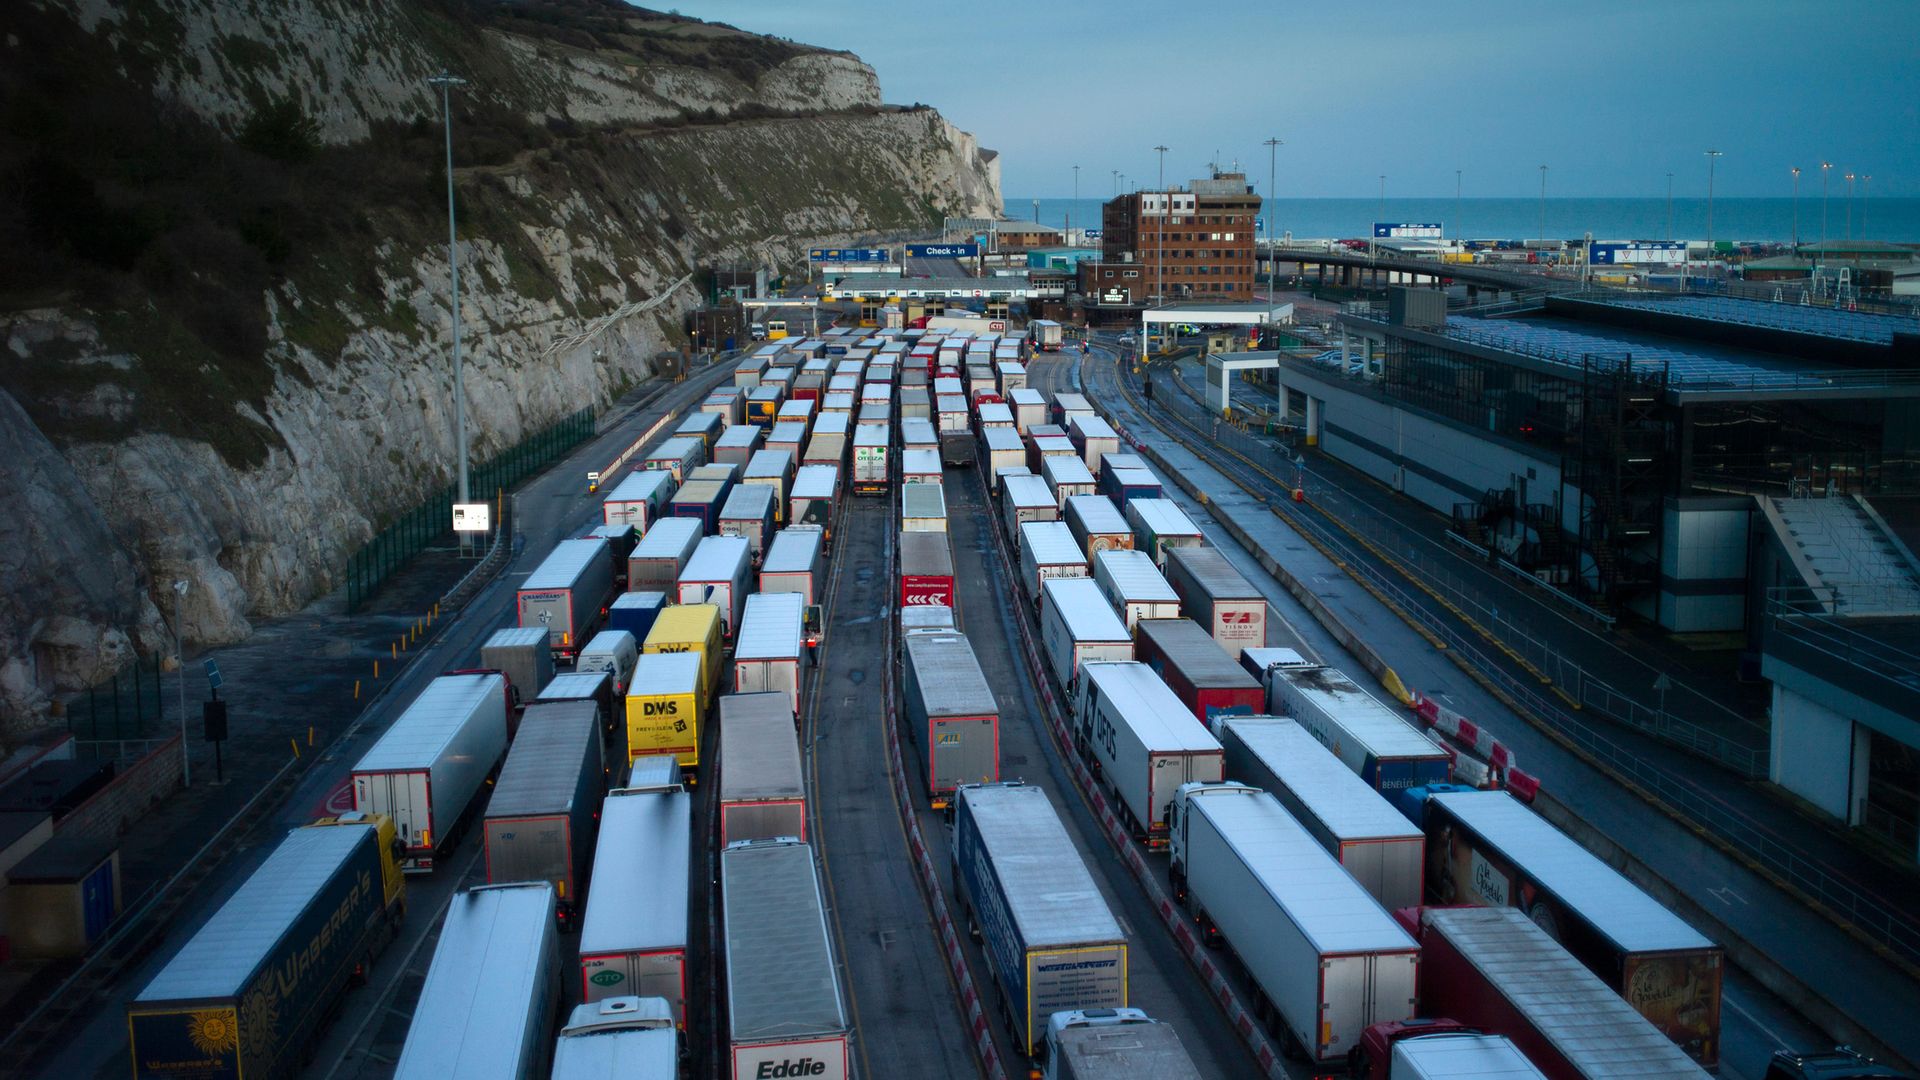 Freight queues at Dover port in Dover, England - Credit: Getty Images